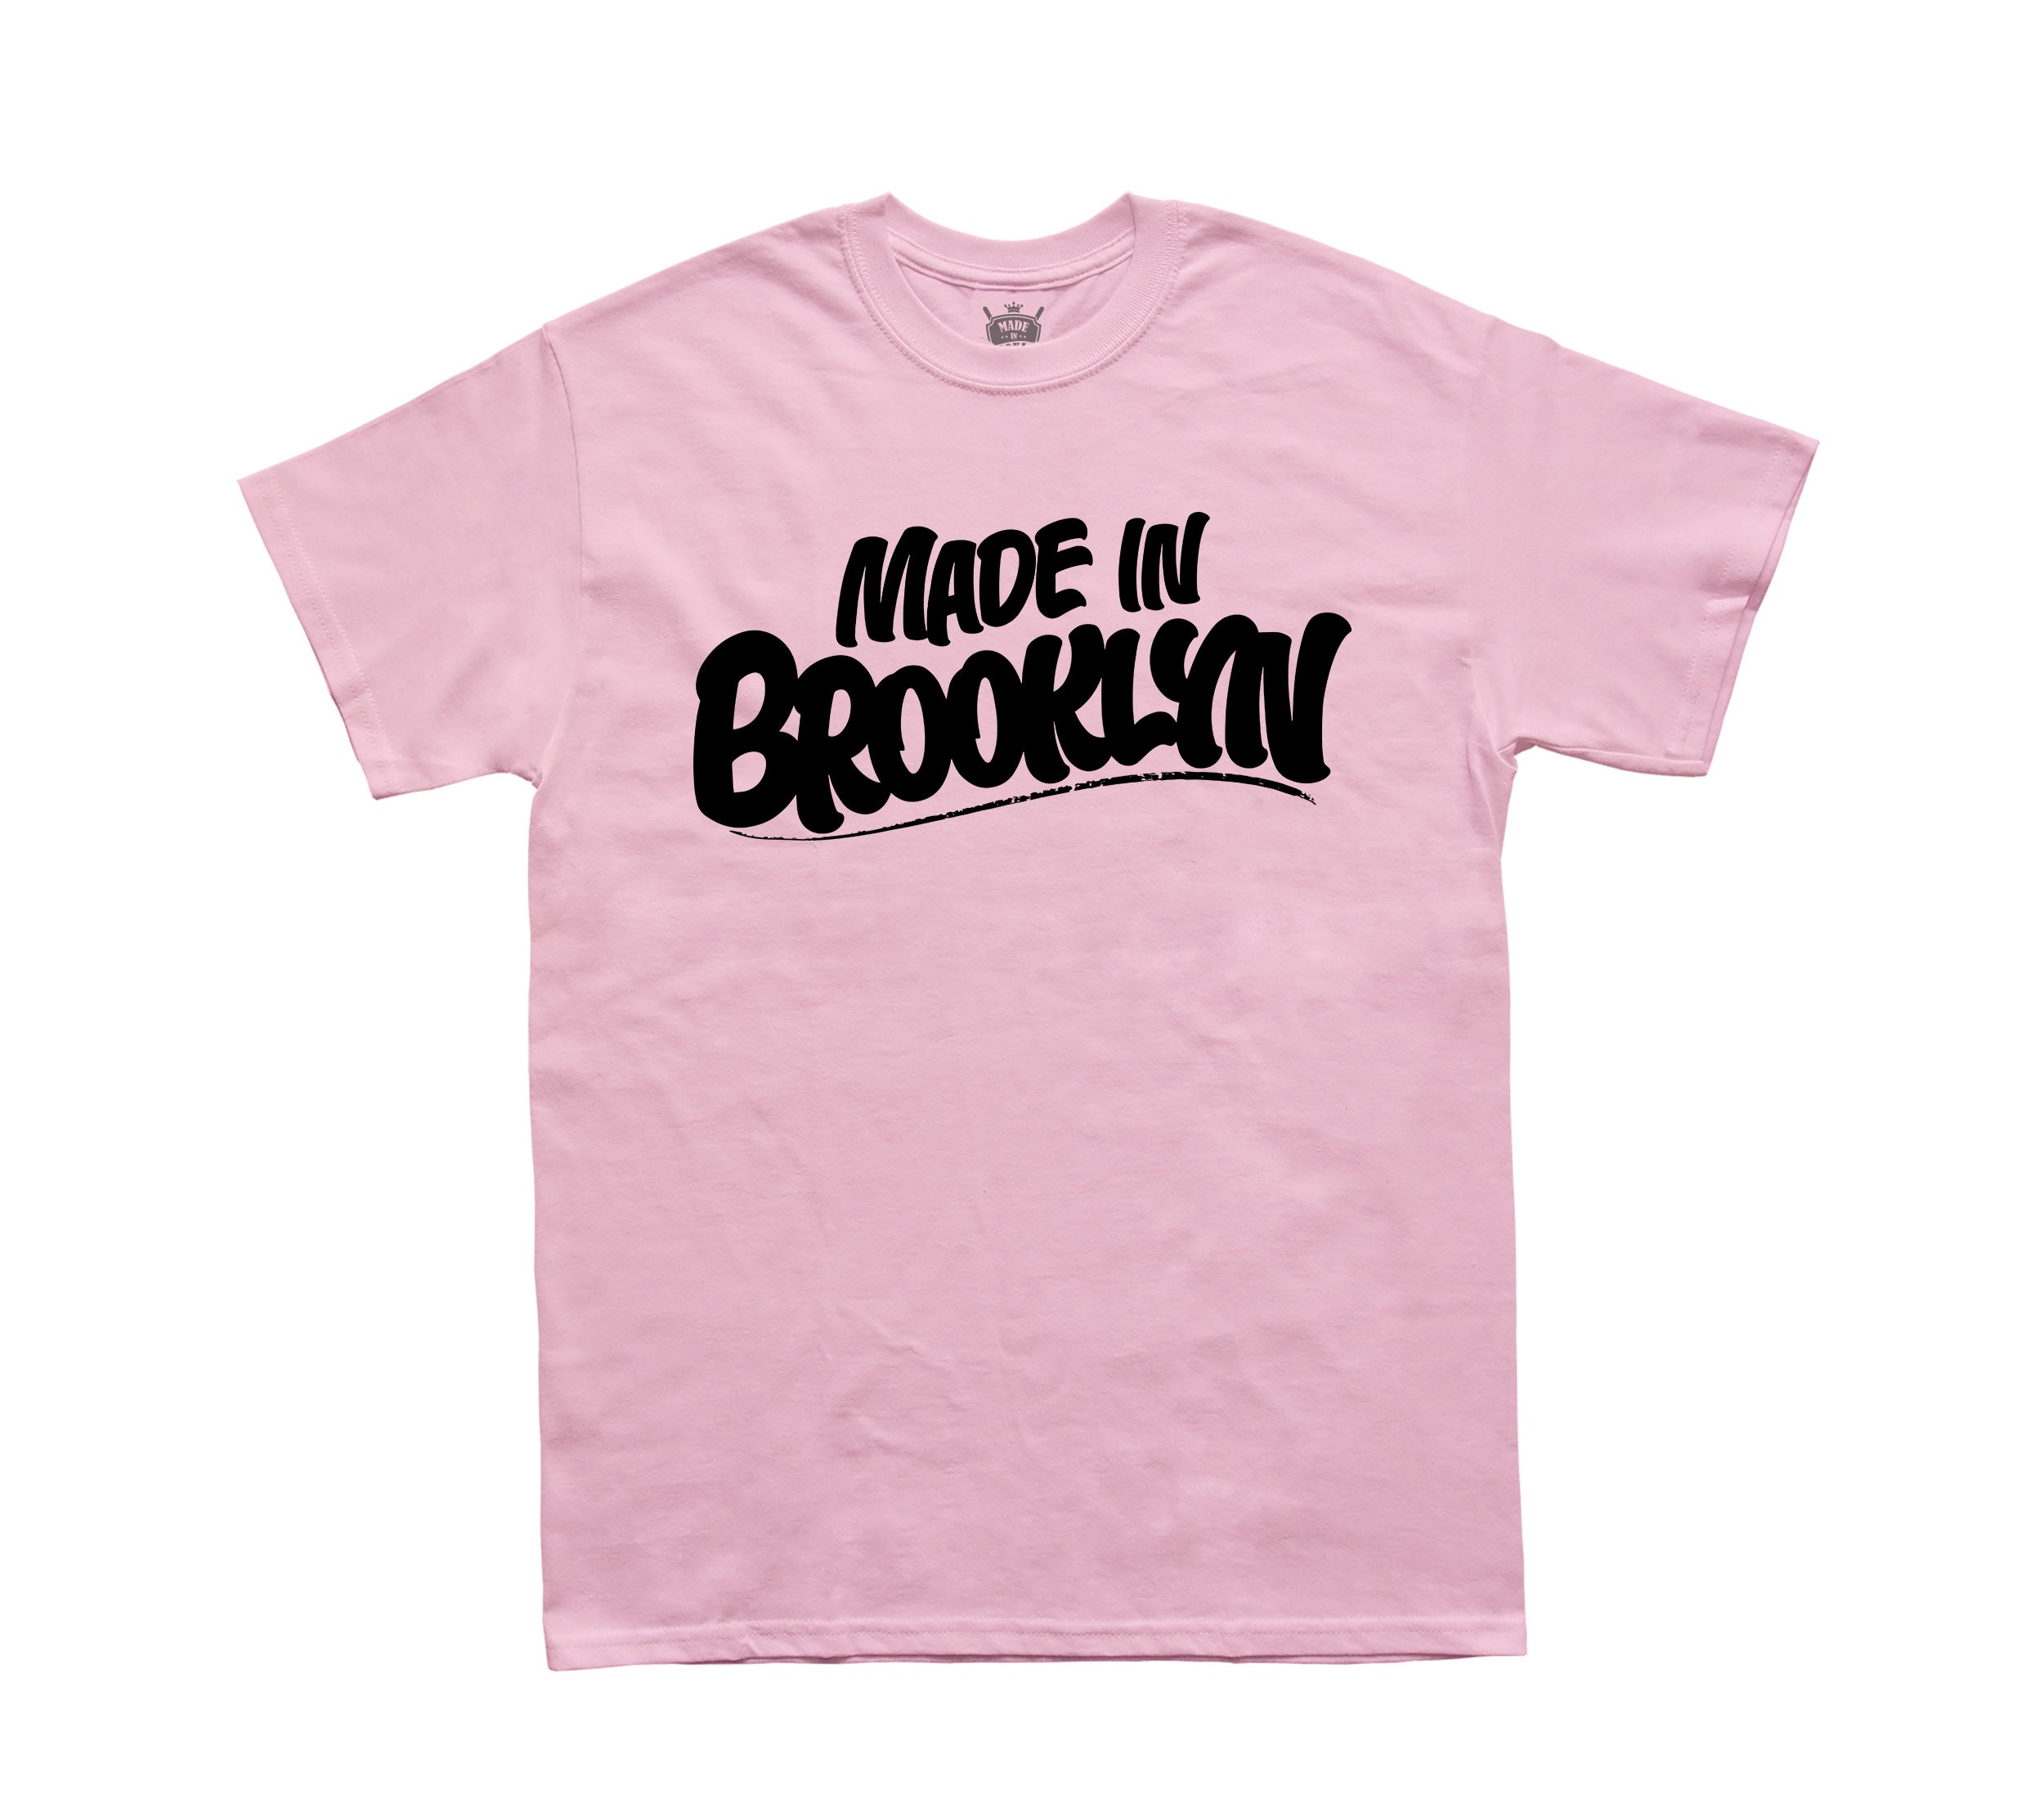 Made in Brooklyn Tee (pink/black) by Peter Paid